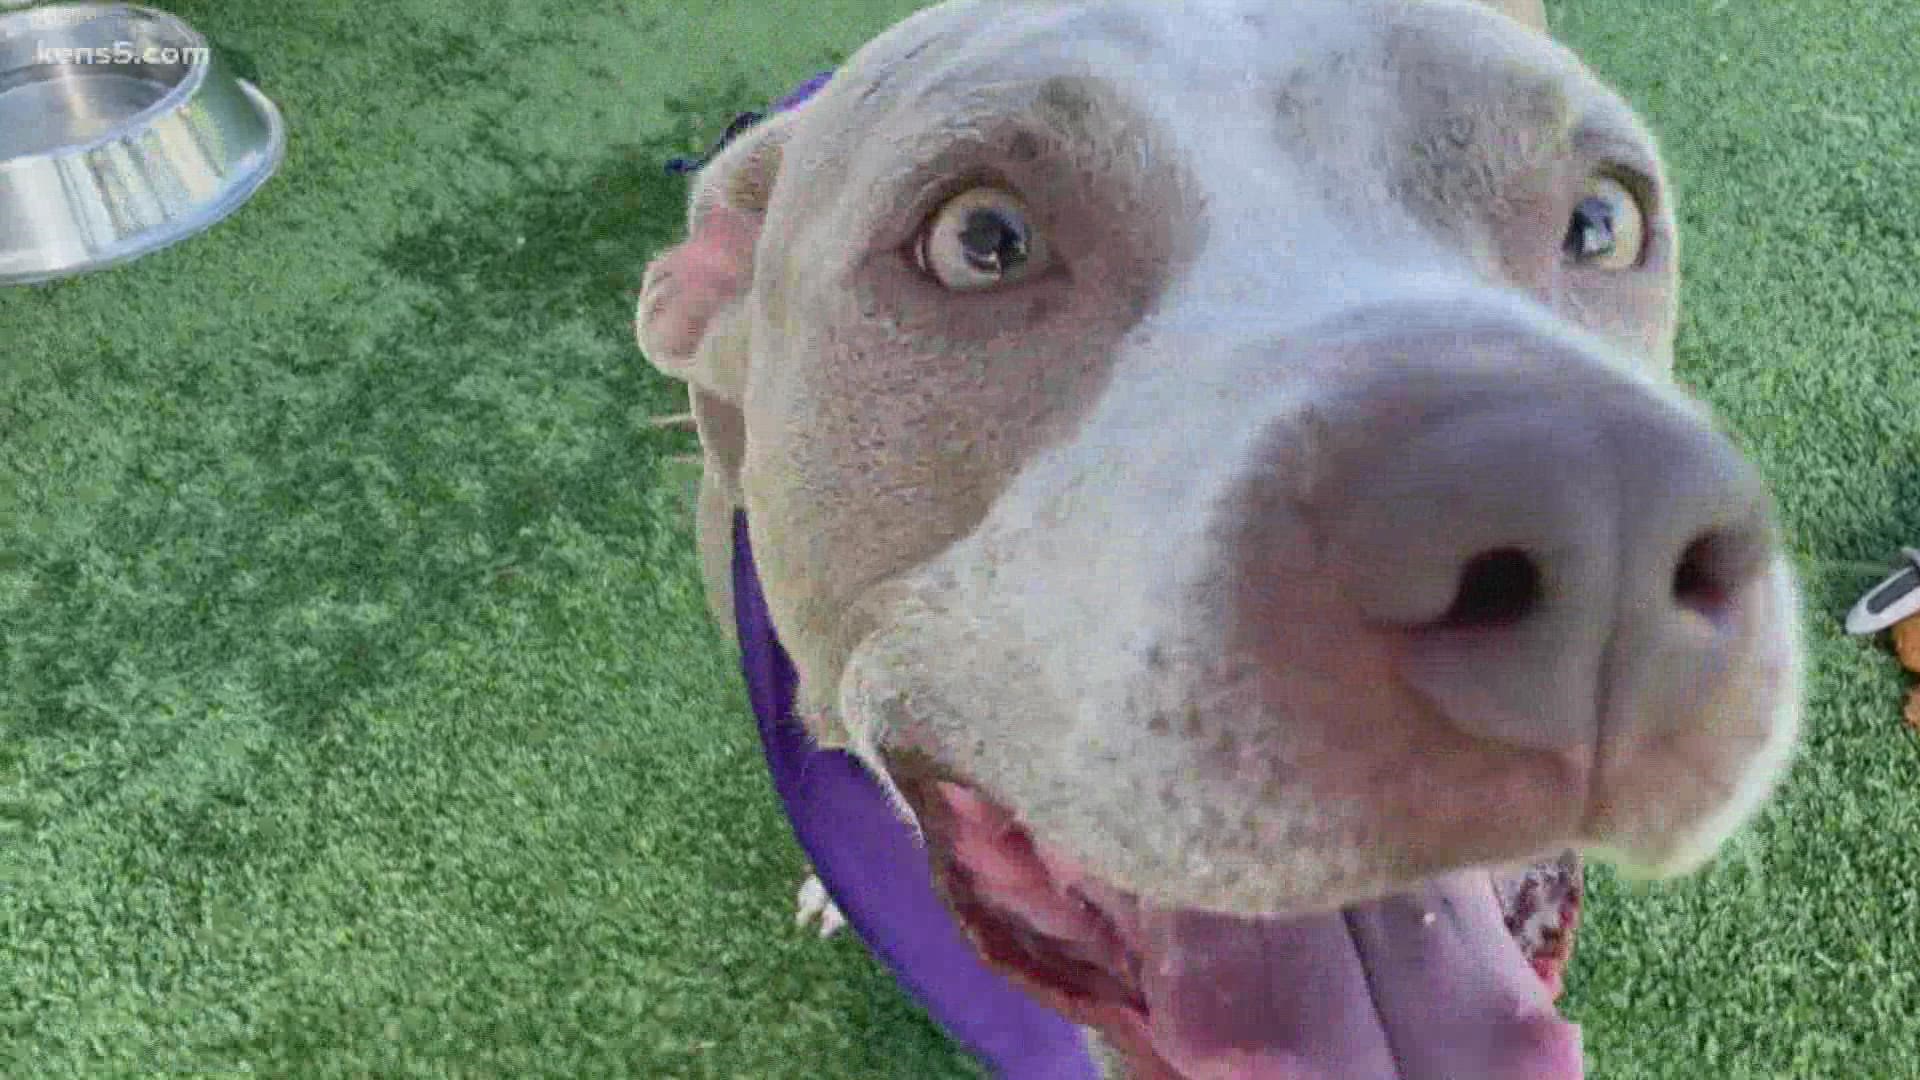 She loves all people and treats, too. She's part of the San Antonio Humane Society's first group of dogs transferred from Houston due to Hurricane Ida.